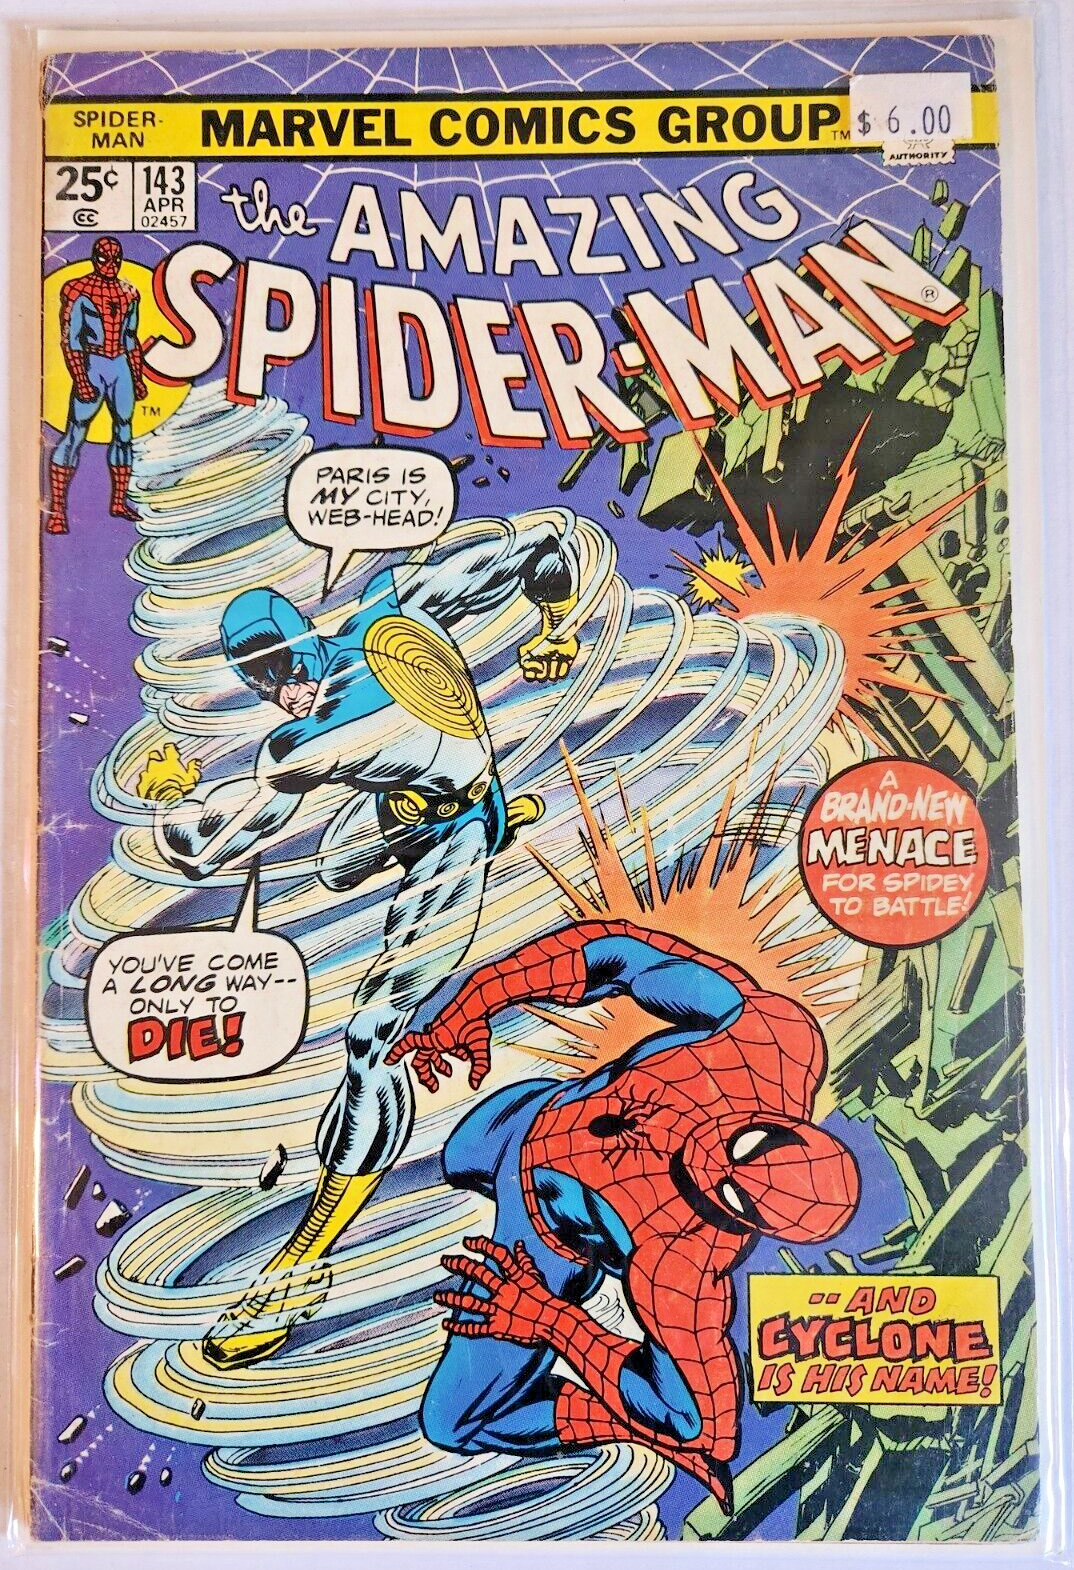 AMAZING SPIDER-MAN #143 1975 1st appearance of Cyclone First Pete/MJ kiss